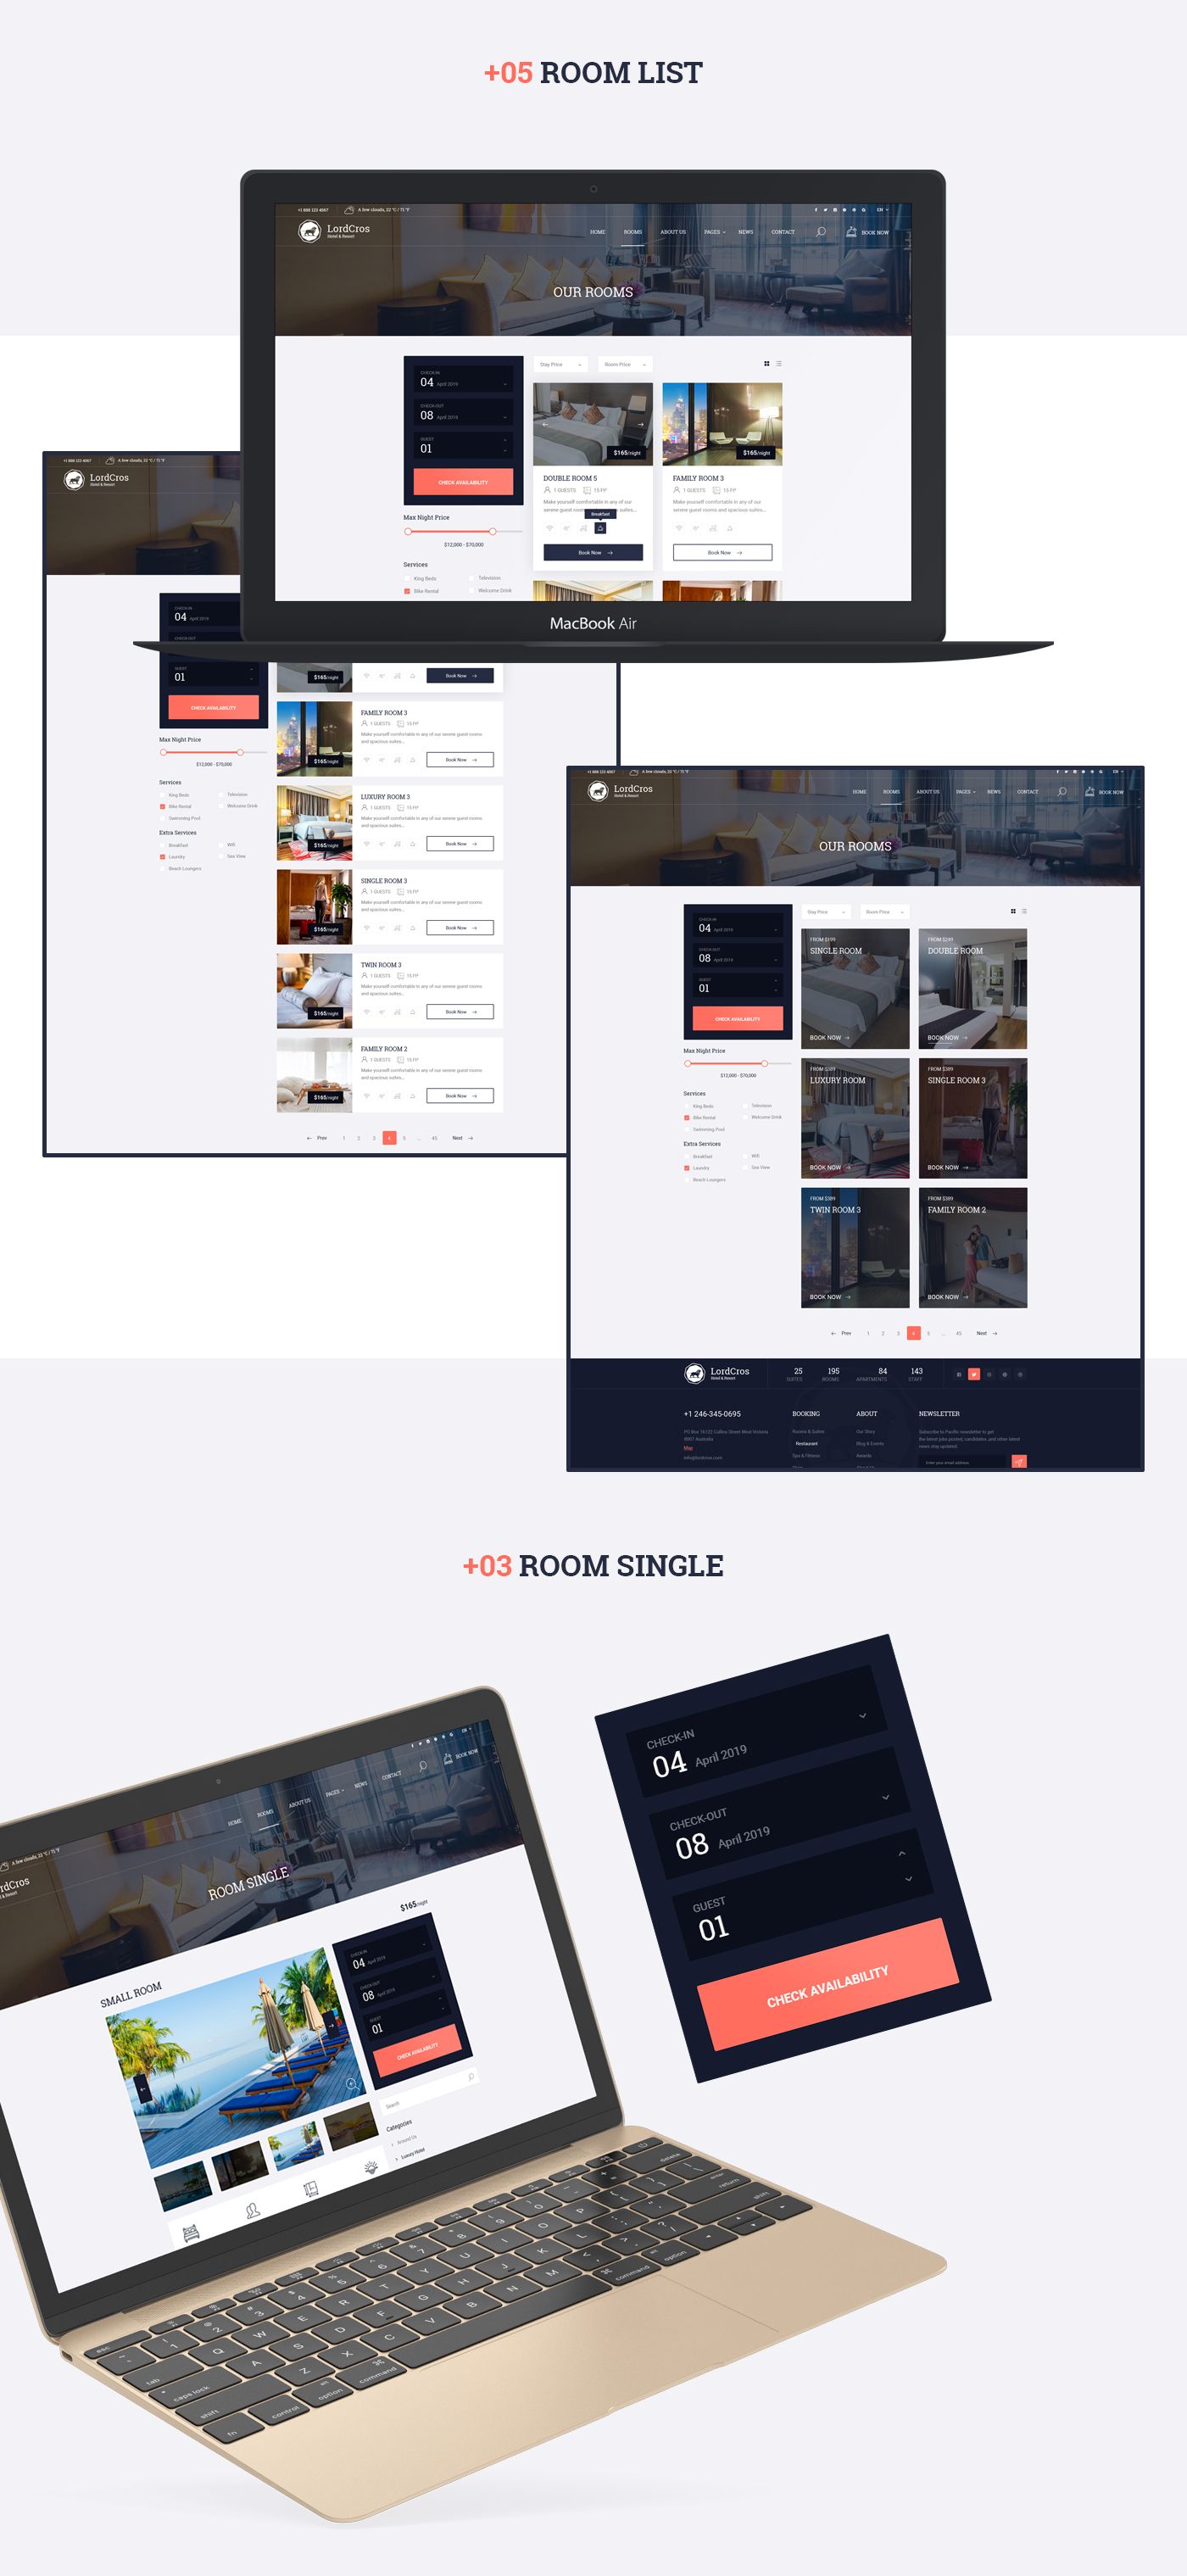 LordCros - Hotel, Resort & Spa PSD Template - 4